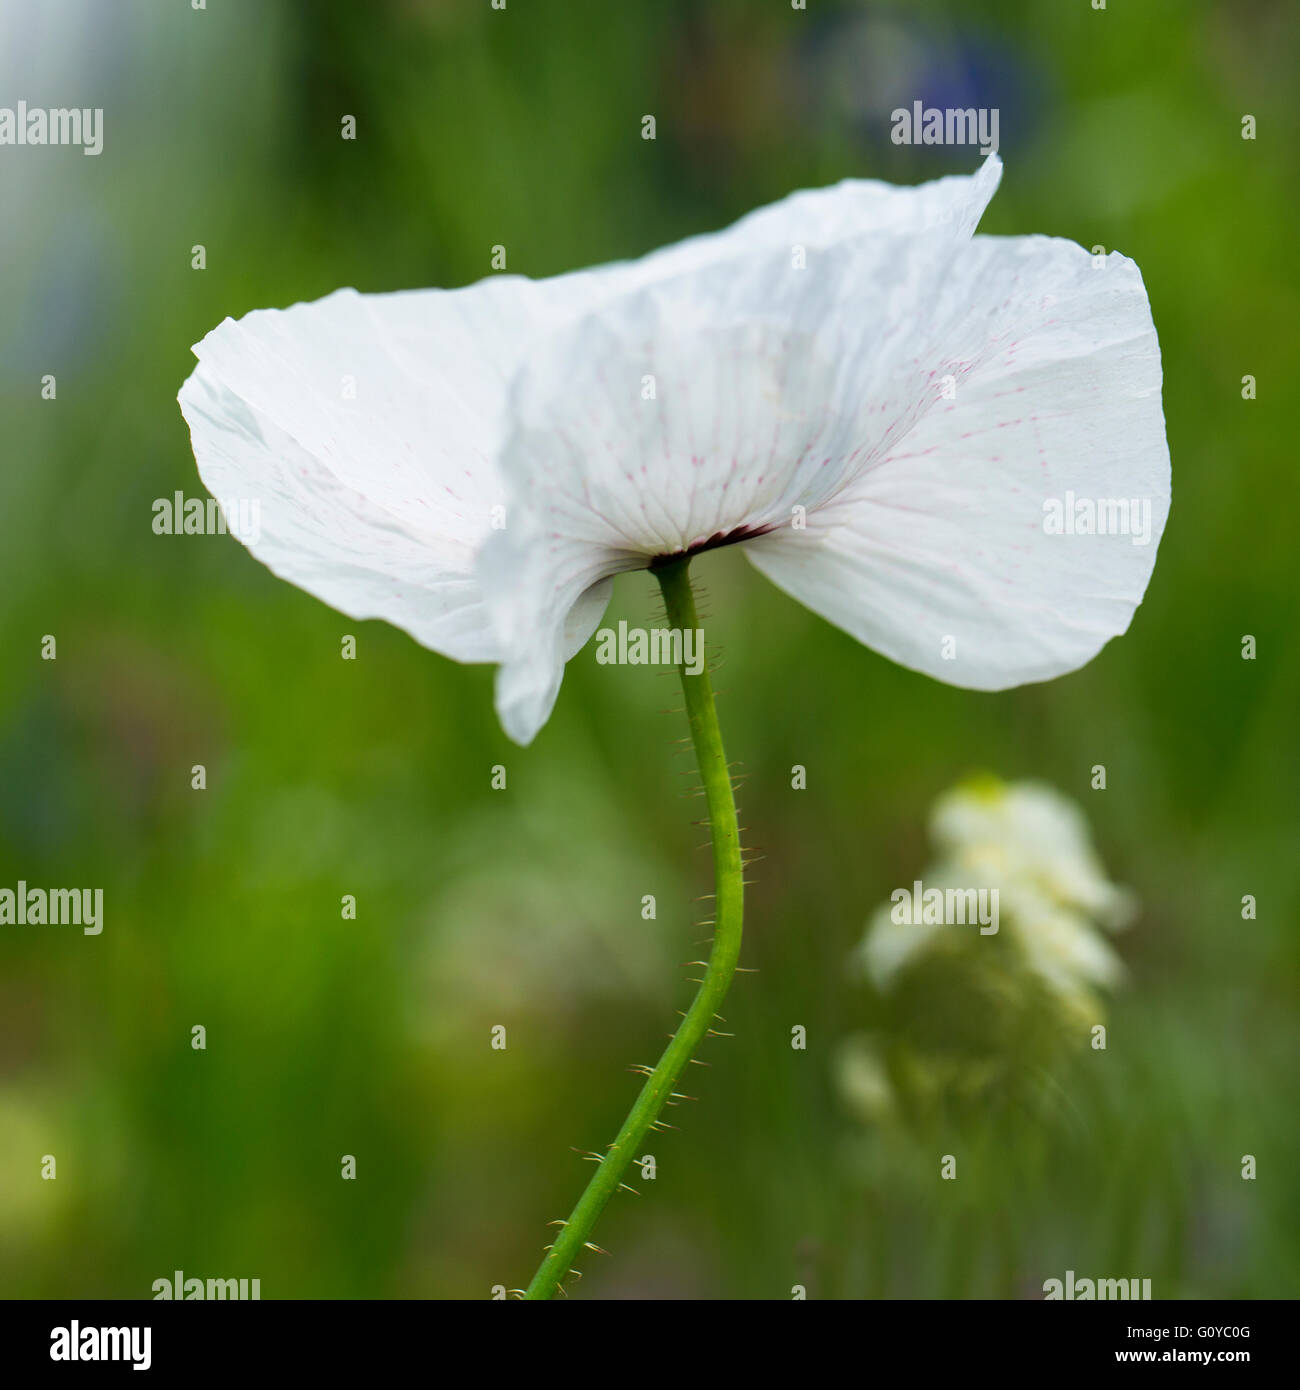 Poppy, Field poppy, Papaver, Papaver rhoeas 'Mother of Pearl', Annual, Beauty in Nature, Colour, Contemporary, Corn poppy, Cottage garden plant, Creative, Delicate, Flower, Summer Flowering, Frost hardy, Growing, Outdoor, Plant, White, Stock Photo